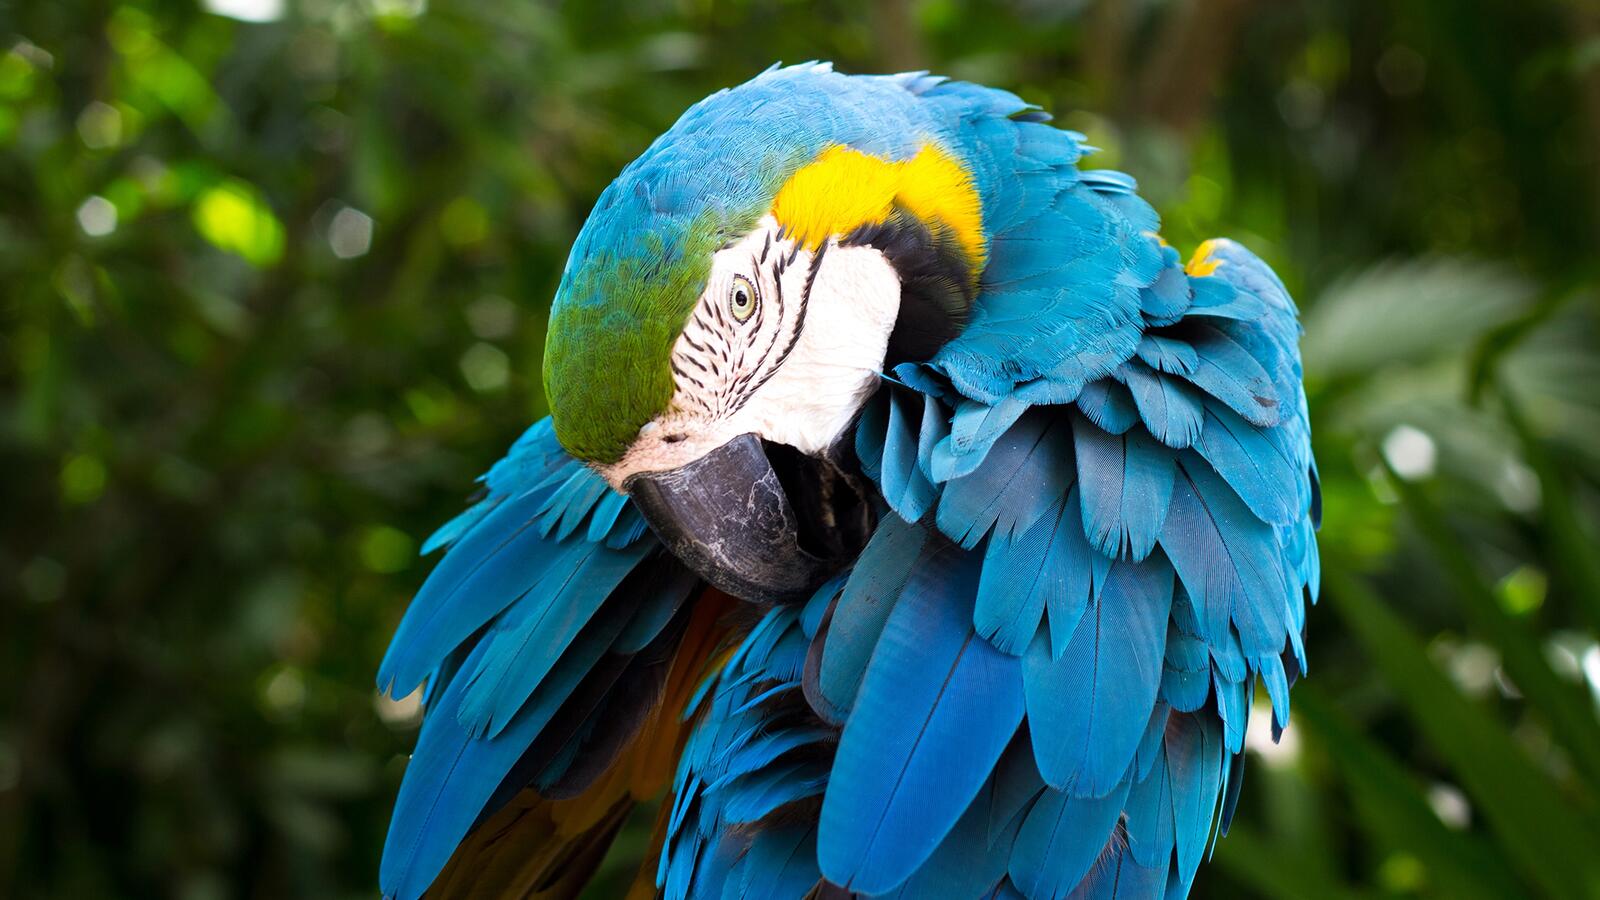 Free photo A large parrot with blue feathers